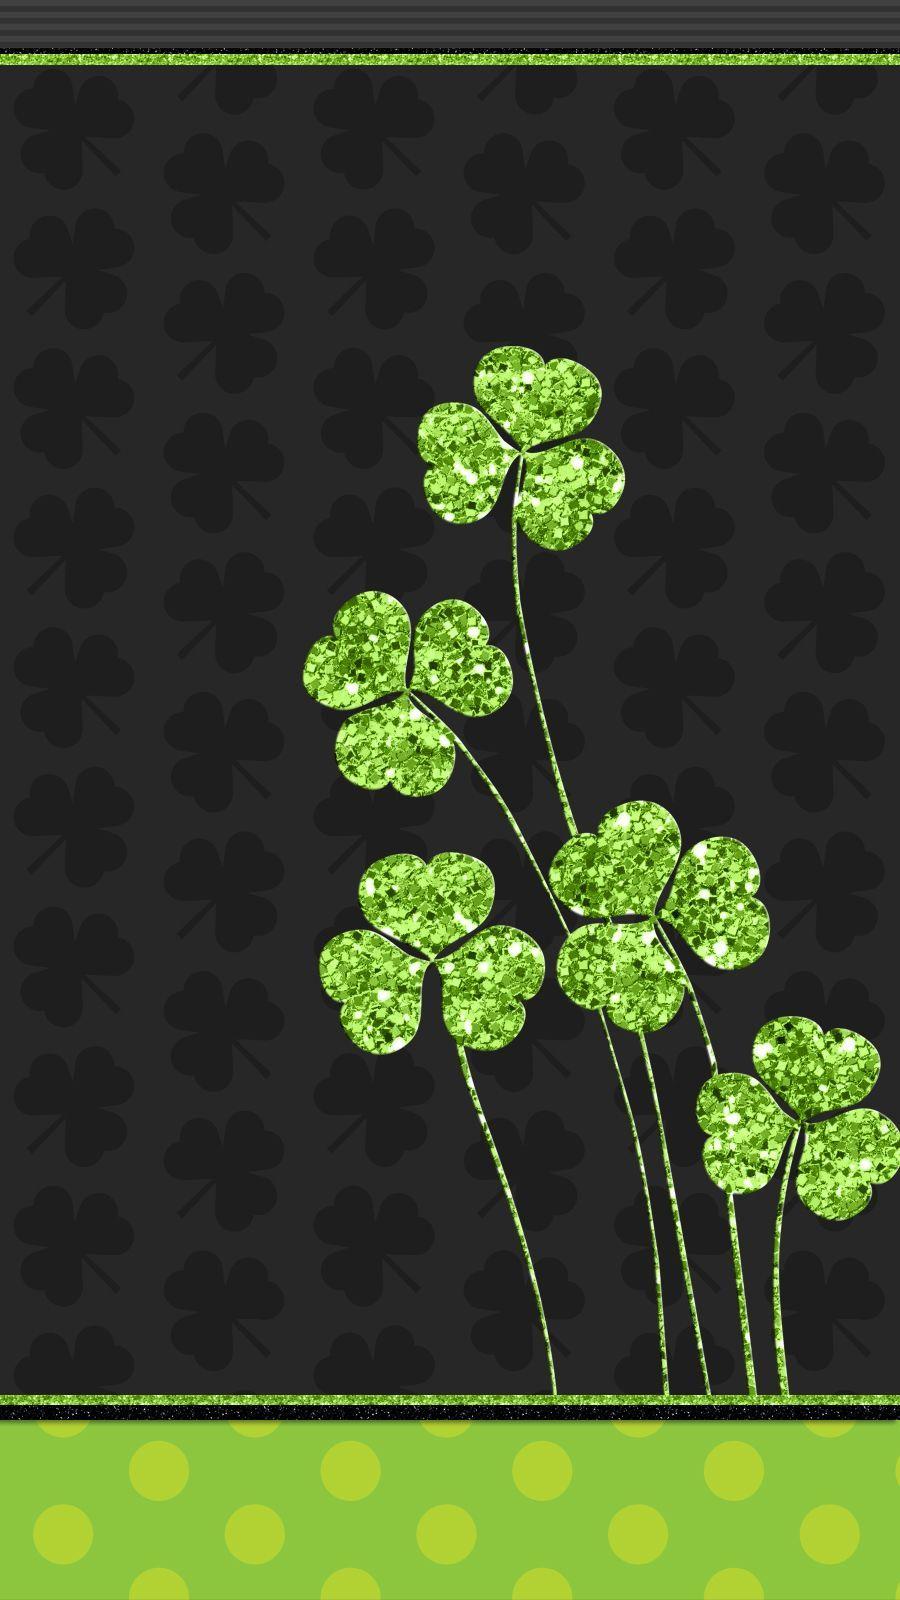 St.Patrick's Day. Cute walls by me♡. iPhone wallpaper